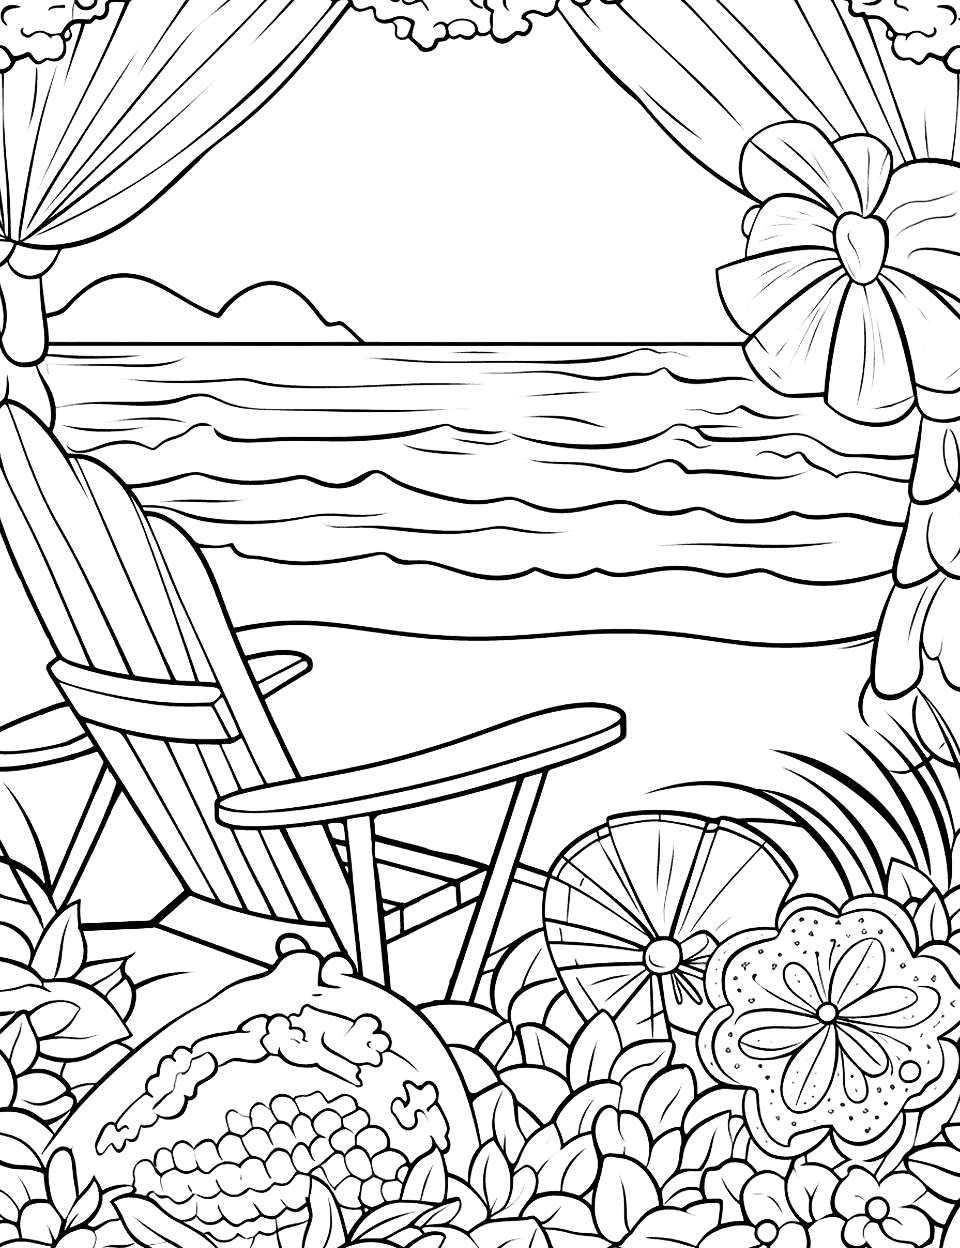 Summer Beach Adult Coloring Page - A coloring page filled with summer beach elements like intricate seashells, detailed sandcastles, and stylish sun umbrellas.